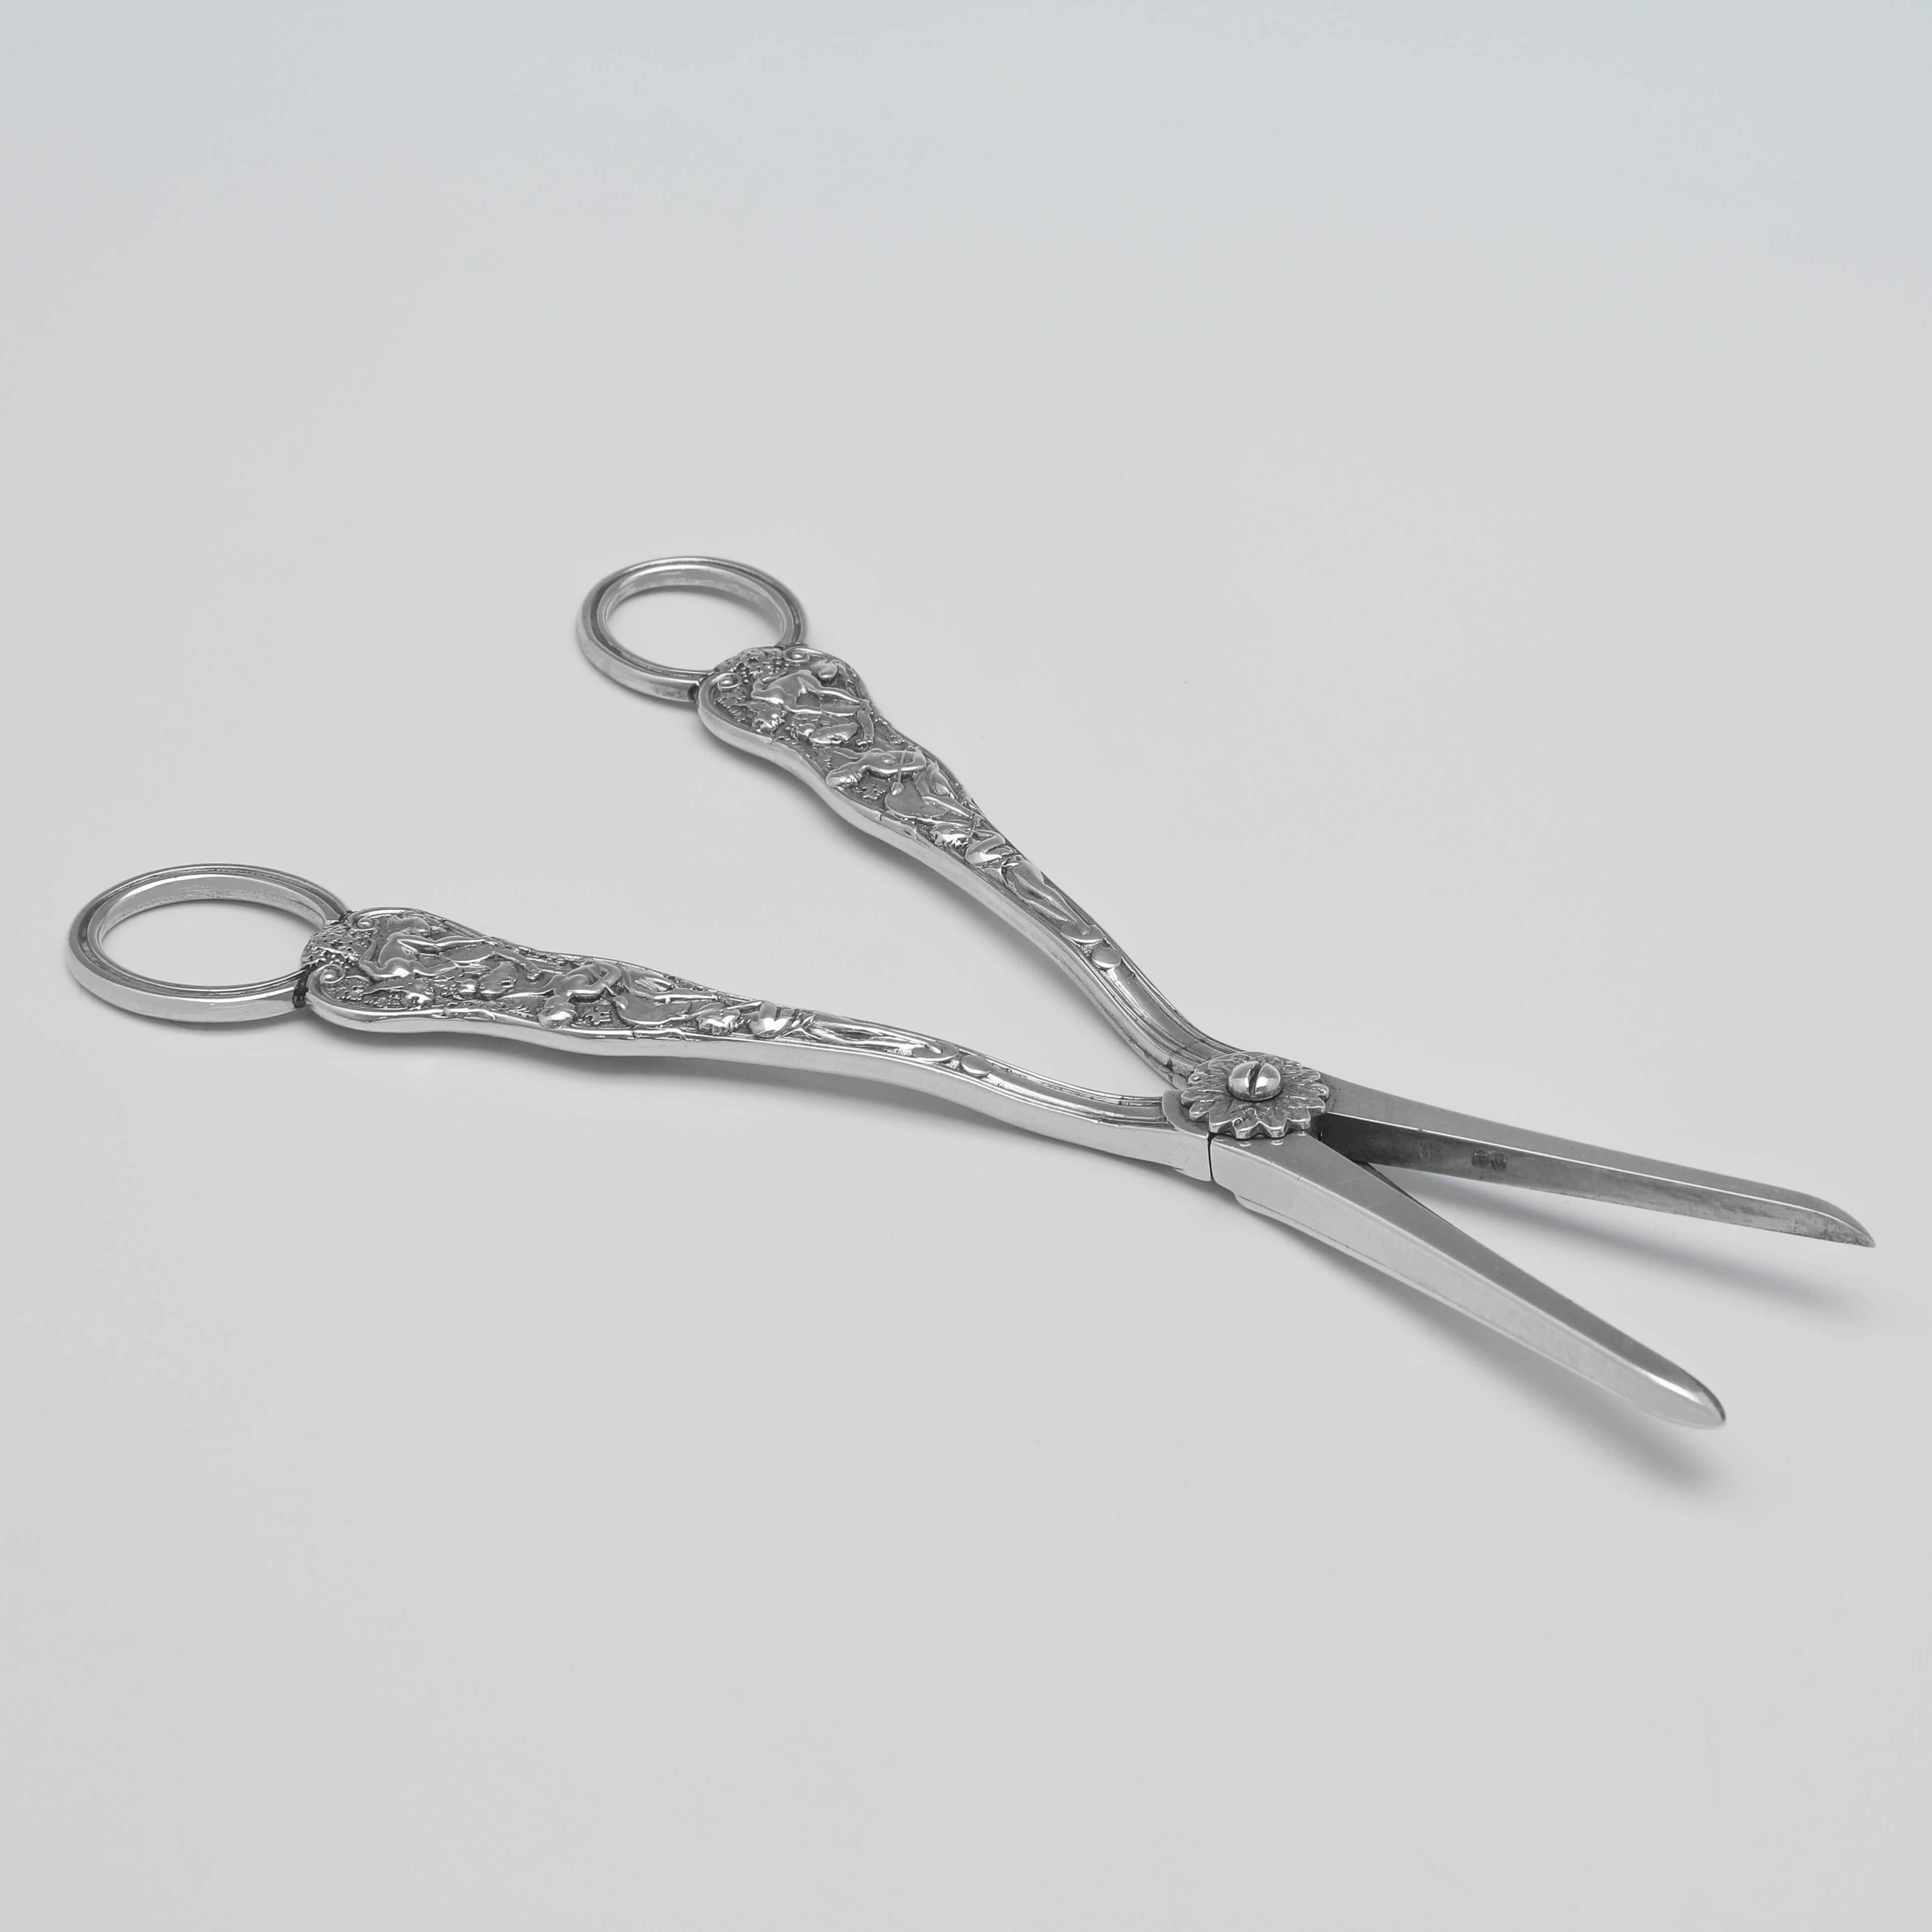 Hallmarked in London in 1874 by Henry John Lias & Son, this elaborate pair of Victorian, Antique Sterling Silver Grape Shears, are in 'Bacchanalian' pattern. The grape shears measure 7